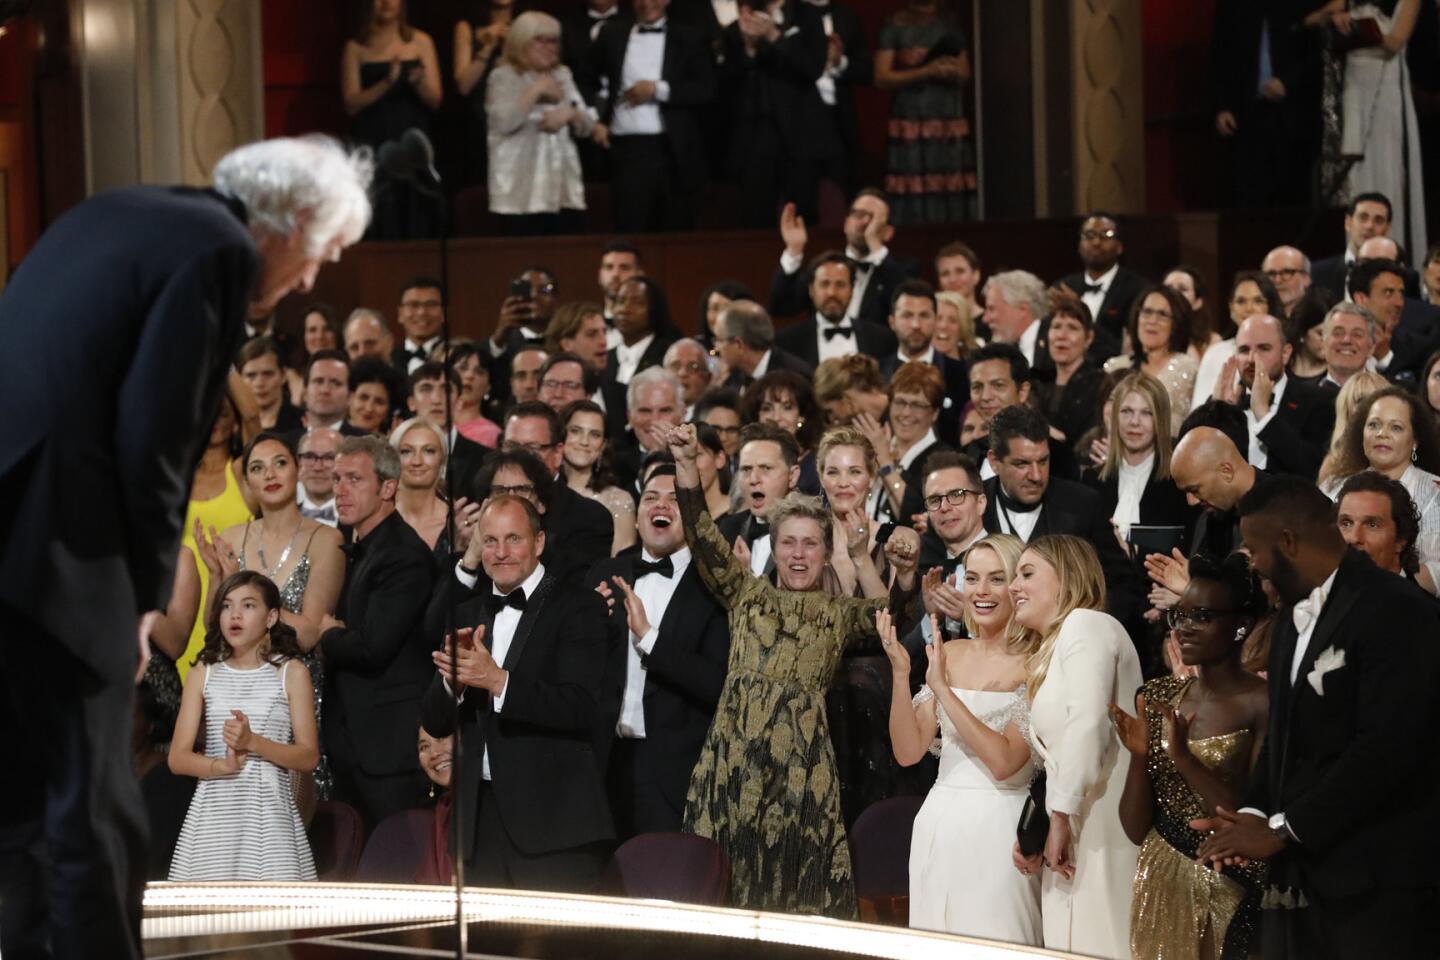 Roger Deakins, the cast of "Three Billboards Outside Ebbing, Missouri" and the audience, from backstage at the 90th Academy Awards on Sunday at the Dolby Theatre in Hollywood.